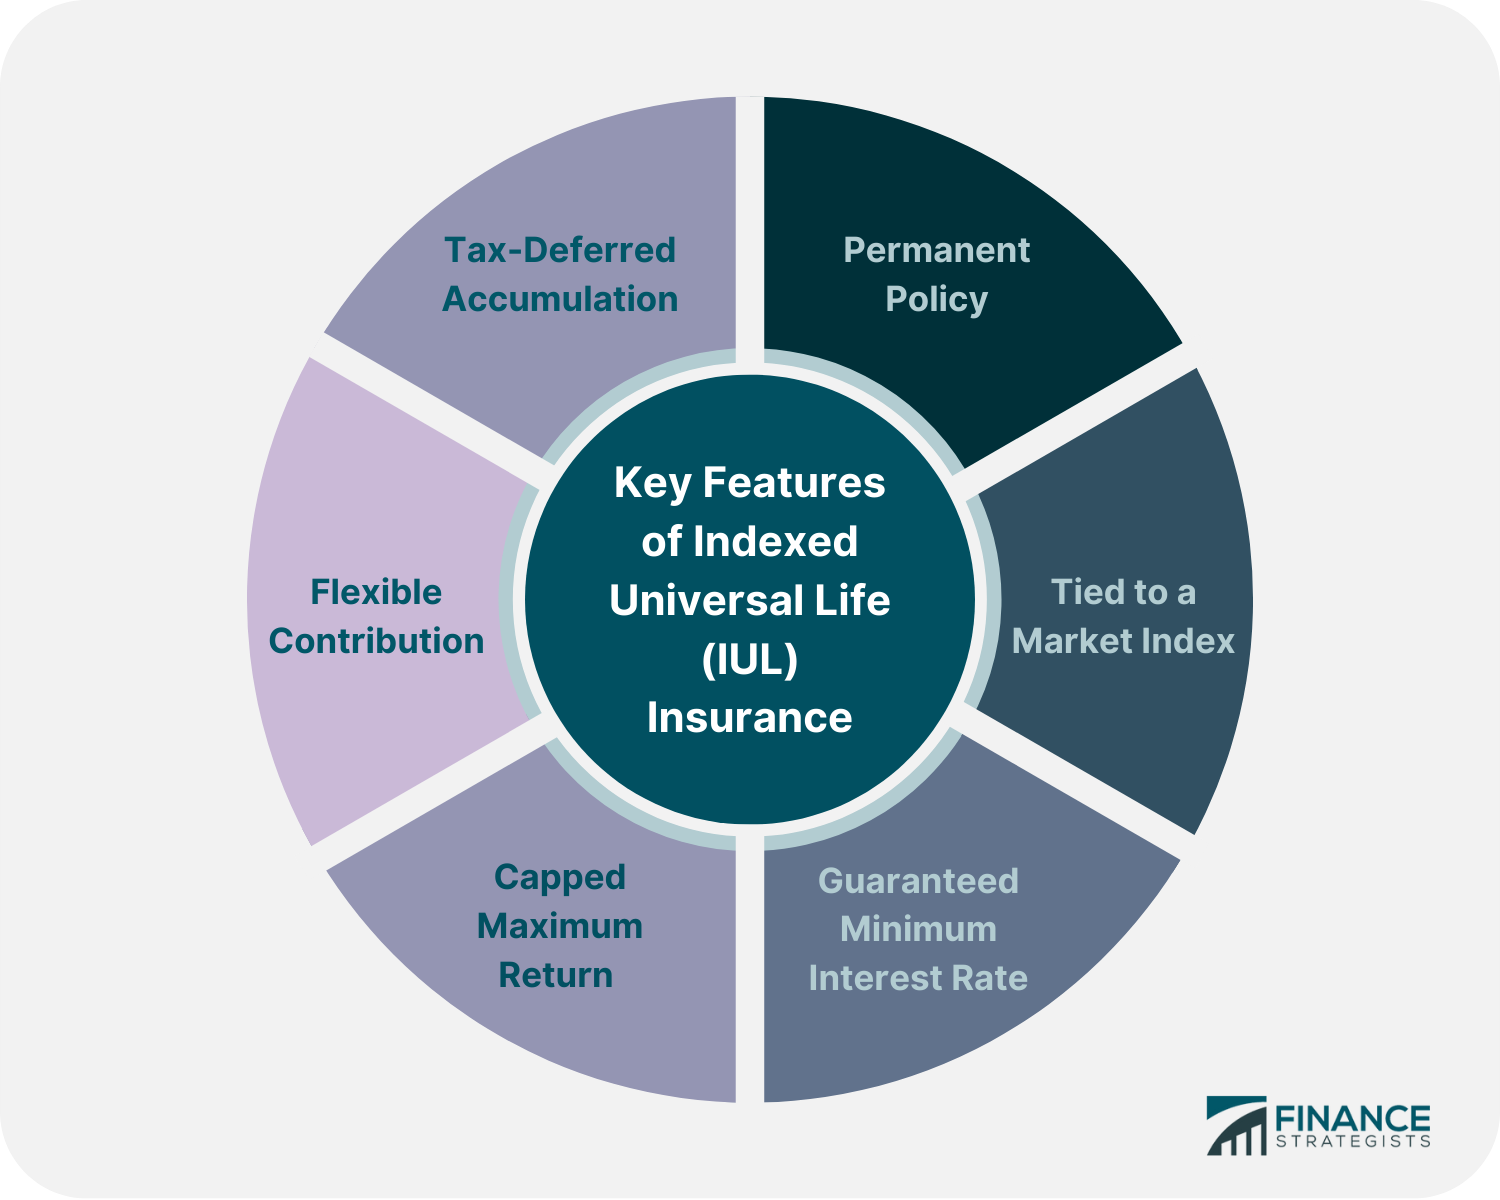 Key_Features_of_Indexed_Universal_Life_(IUL)_Insurance